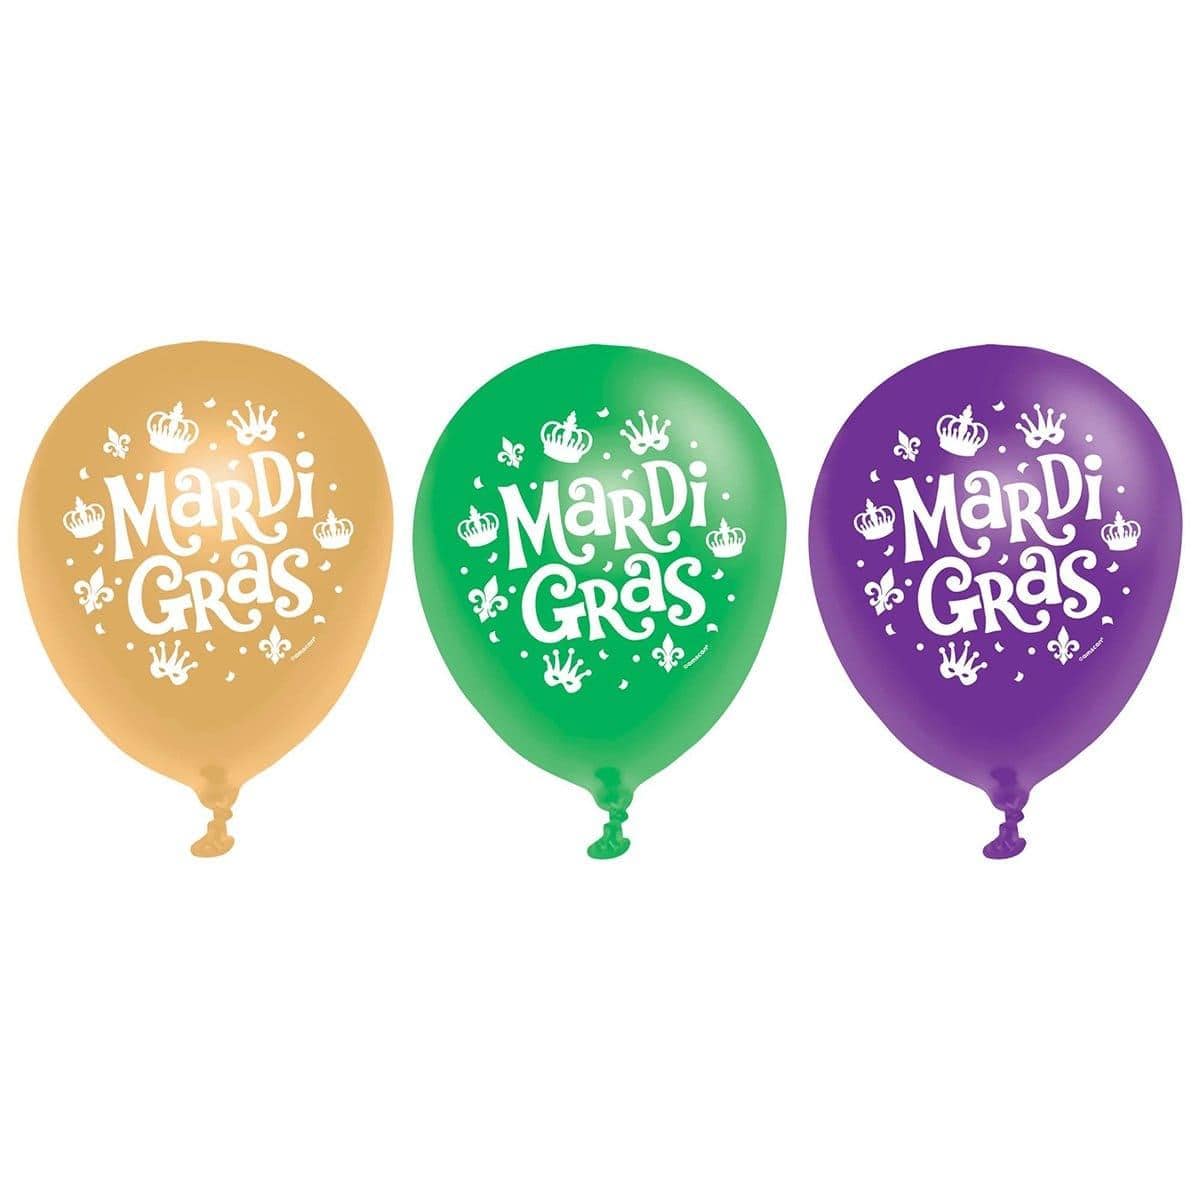 Buy Mardi Gras Mardi Gras, Latex Balloons 12 inches, 15 count sold at Party Expert